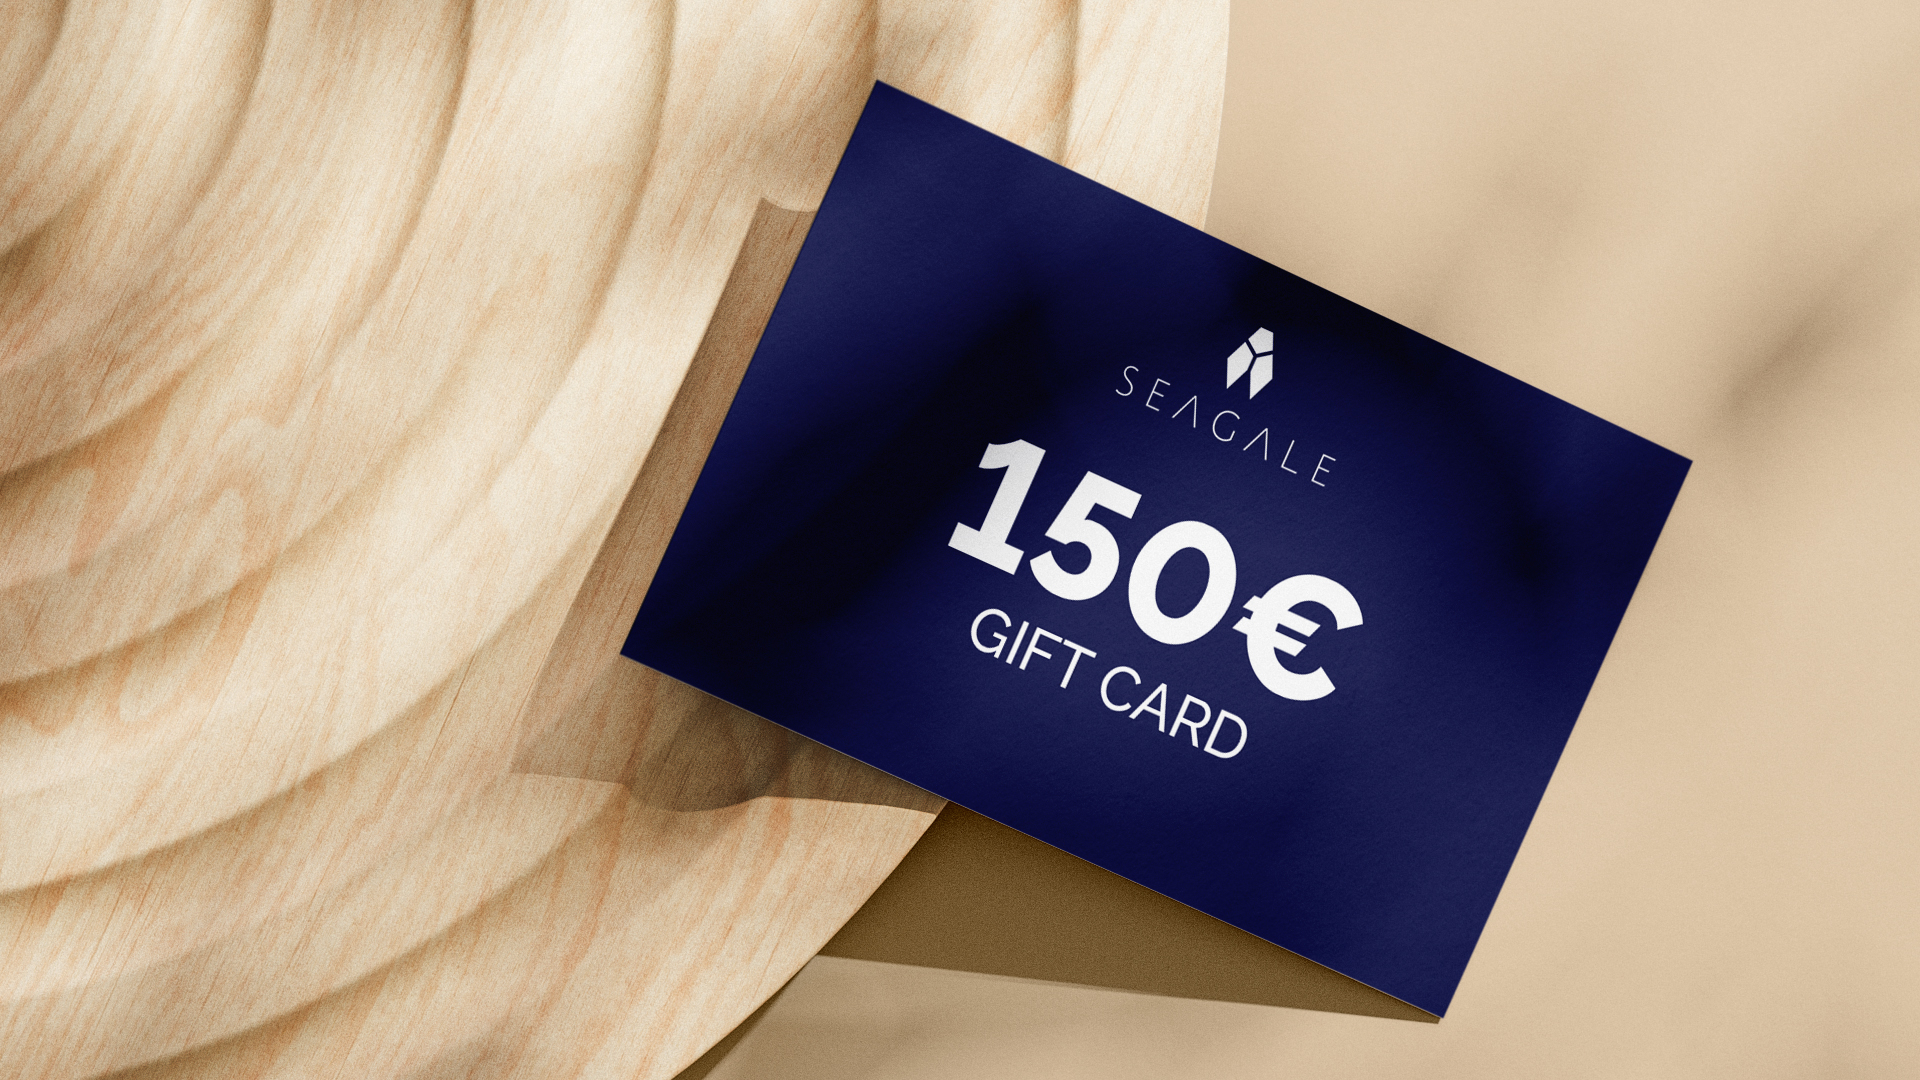 SEAGALE GIFT CARD